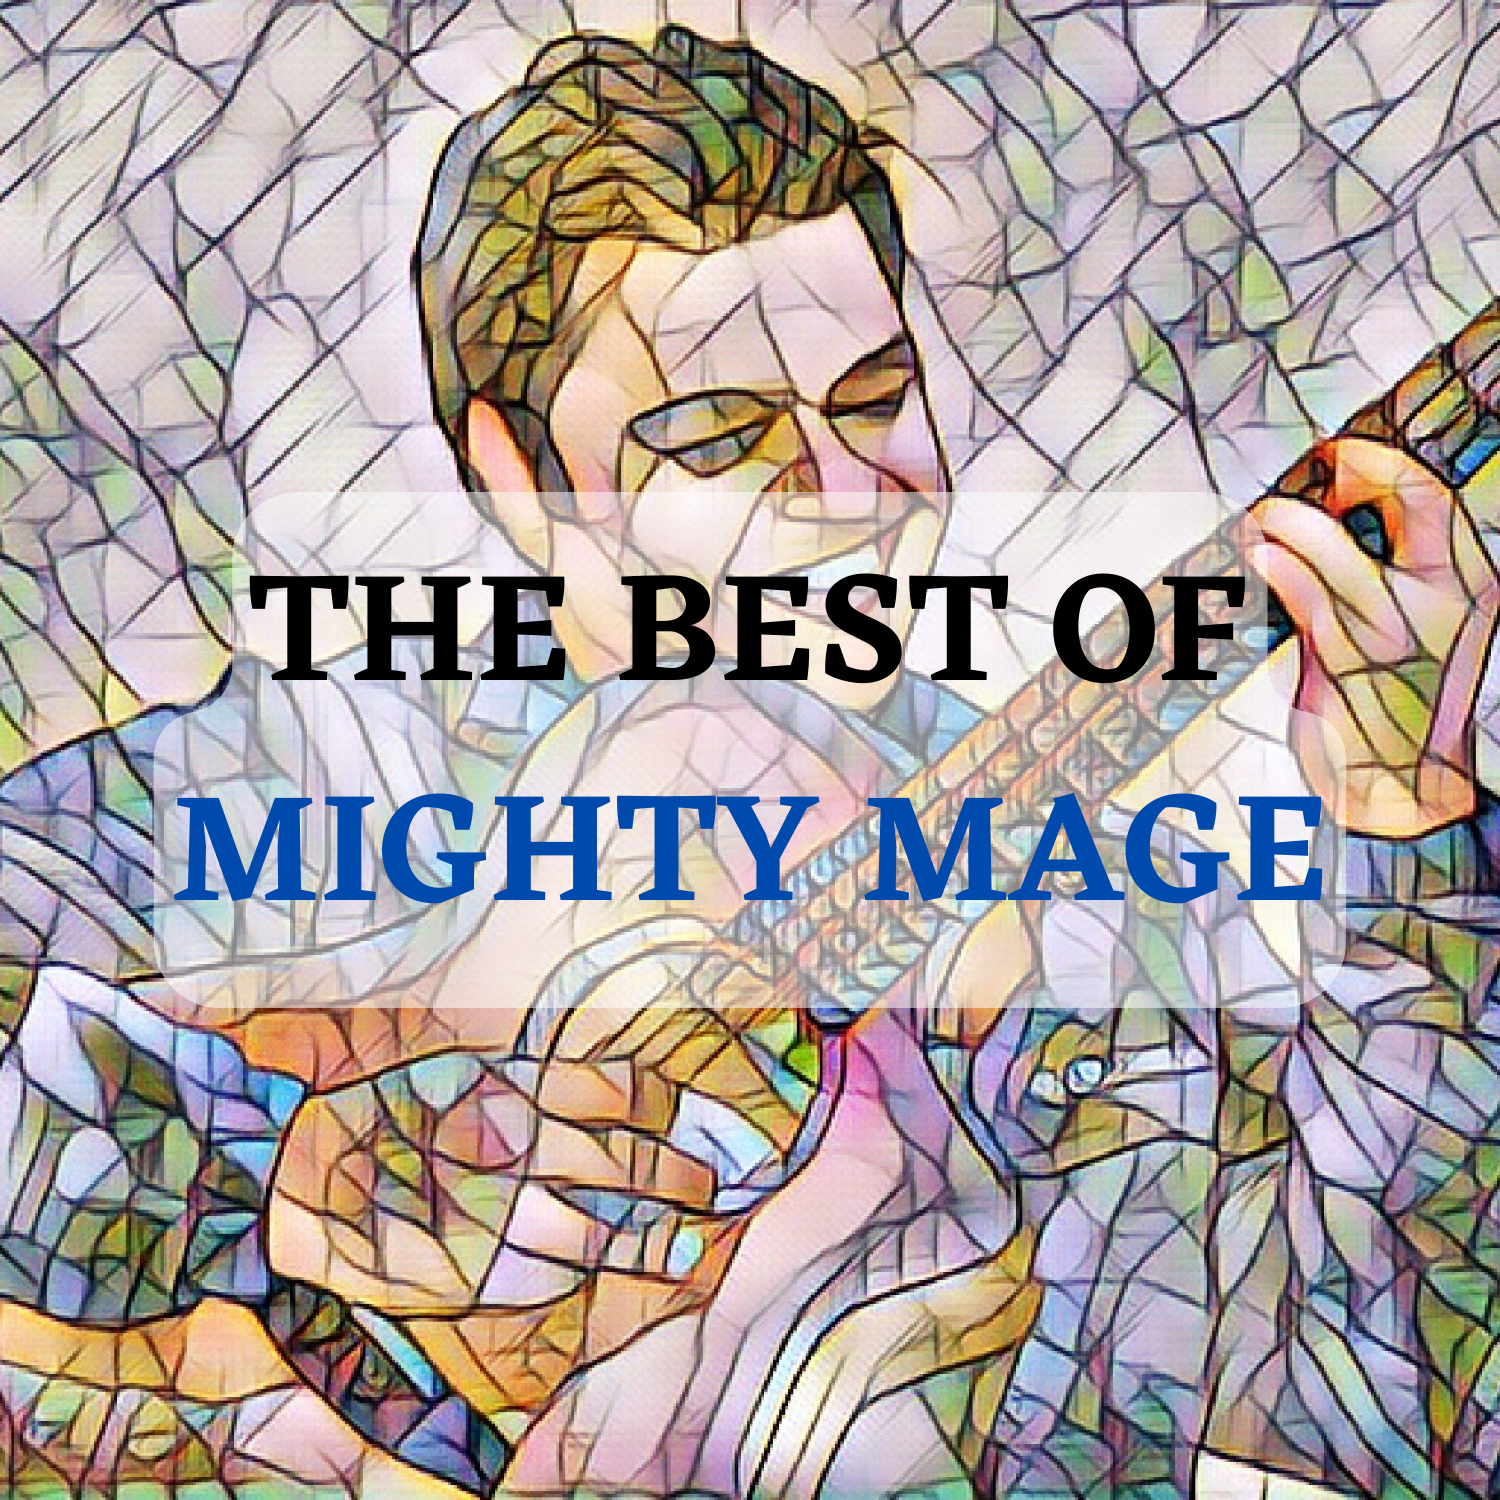 After six professionally recorded projects and with an impressive discography, Mighty Mage releases ‘The Best Of Mighty Mage’